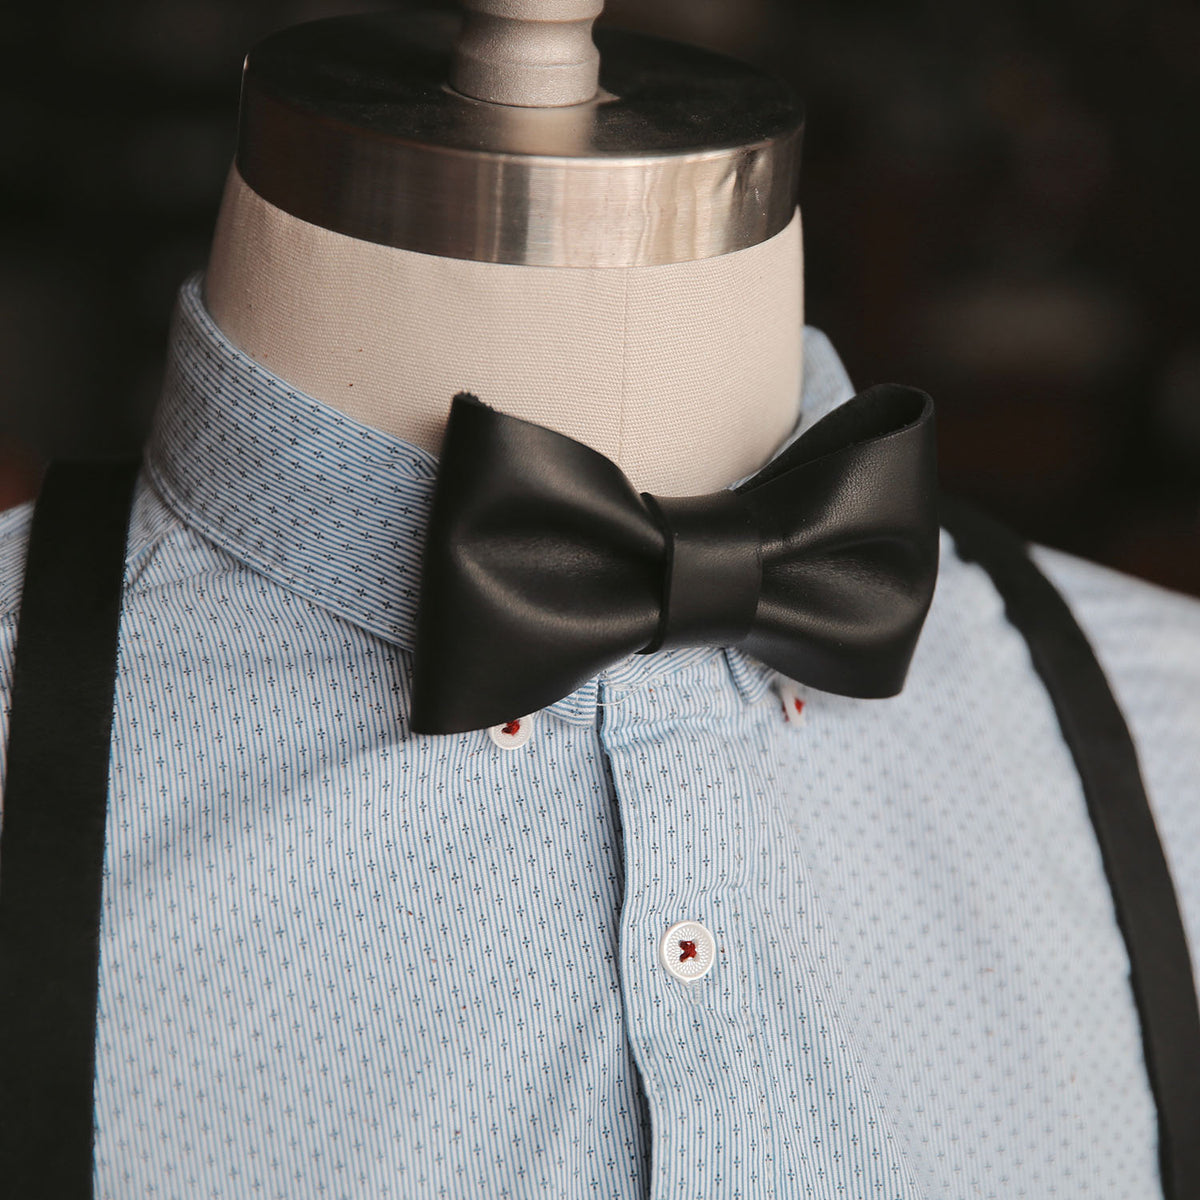 The Mr. Baker Fine Leather Bow Tie Bowtie